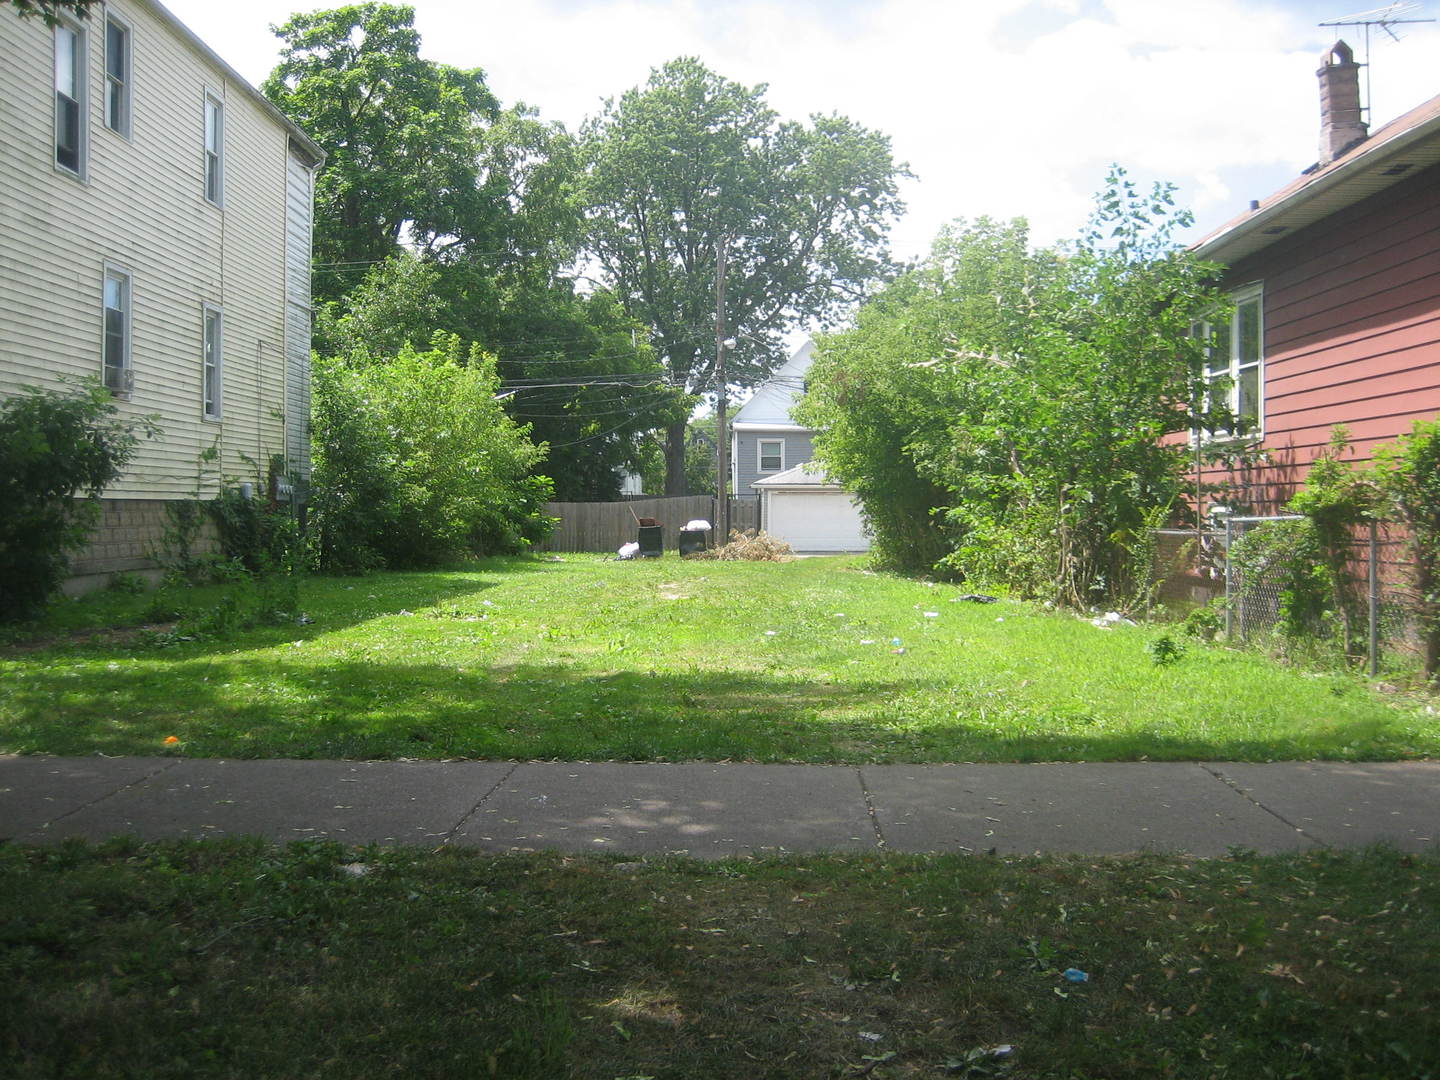 a view of a backyard with plants and large trees